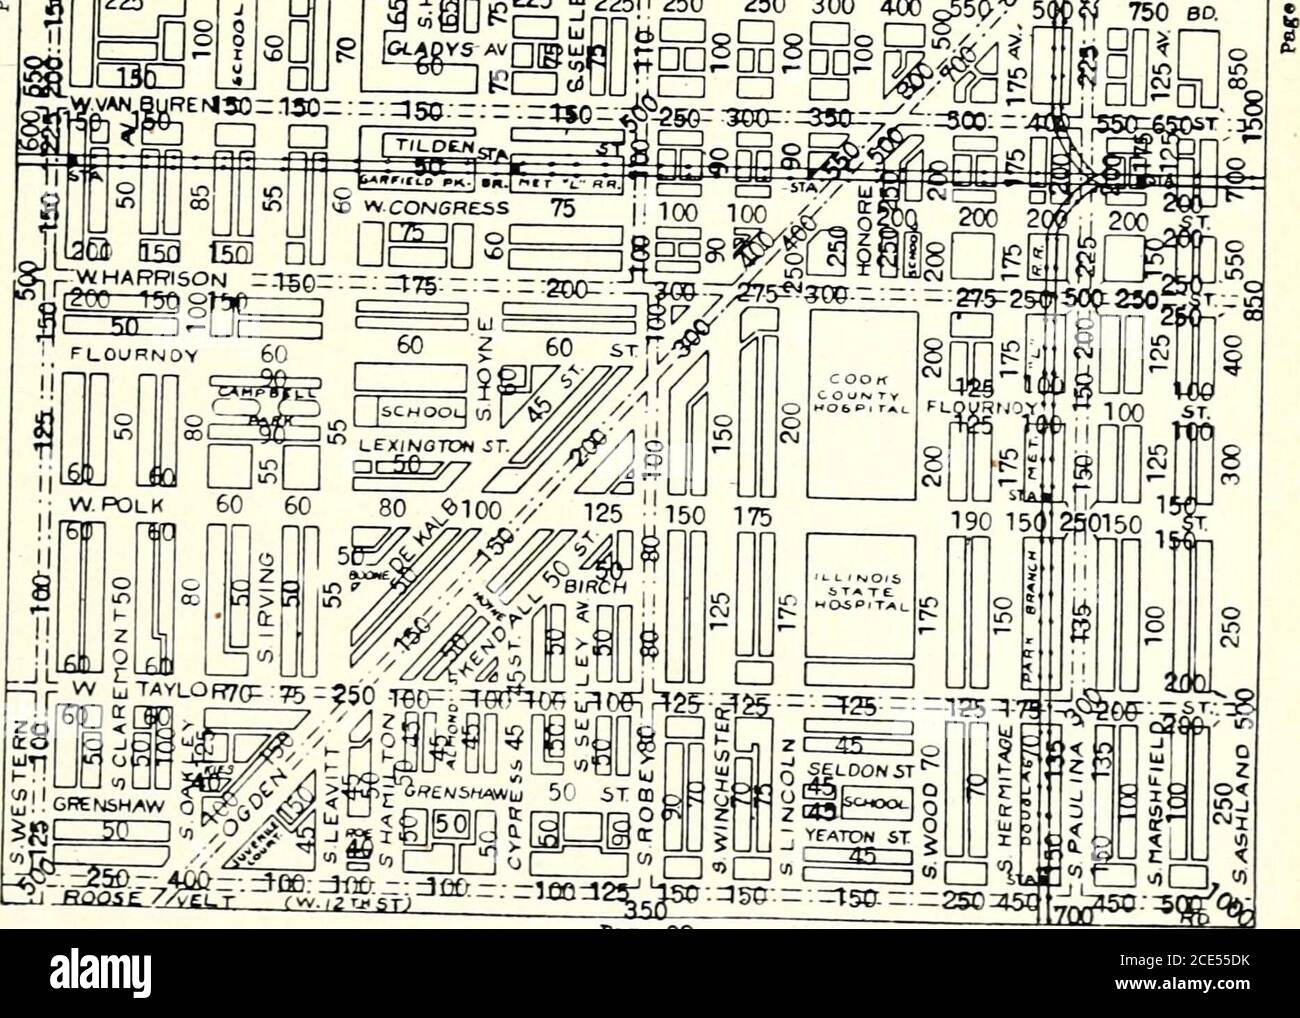 . Olcott's land values blue book of Chicago . m 100 .11125 l25 125 125 20o 3|Ao W.ADAMS 120 126 irin^n«i TJ? ^l^ T^ S rr^ E? L   i J :i//,^ ]U ff 125 PL ^g^gaJoD, n^-°n?.^ -^ ^^ ^§ § § -5^^&gt; ^^0- n 0(5° nn nn r^ r^ 1^ r^° ?°0 300A&^ J//^fEo^r0 200 ^00°-J&gt;UUt+cz=D-c=D-a-S-U[?-rf&gt;K]d| lU n w JACKSON200 200 200 ^00 Ui— ? Sn^fe5225n250 250 300 400 o55 ^ [ctAOVS AVj-|[giu gi—I Sill L^ LJU I |F;| IMUU il I I 1 I I ^^^ ^^= • = -=150-- ?• --.=U0-iB^5a 300r; ^5Ctr. P8«e 89 OLCOTTS LAND VALUES BLUE BOOK W. F. CONLON & Co. REAL ESTATE Specialists in Selling, Renting and Managing WEST SIDEMAN Stock Photo